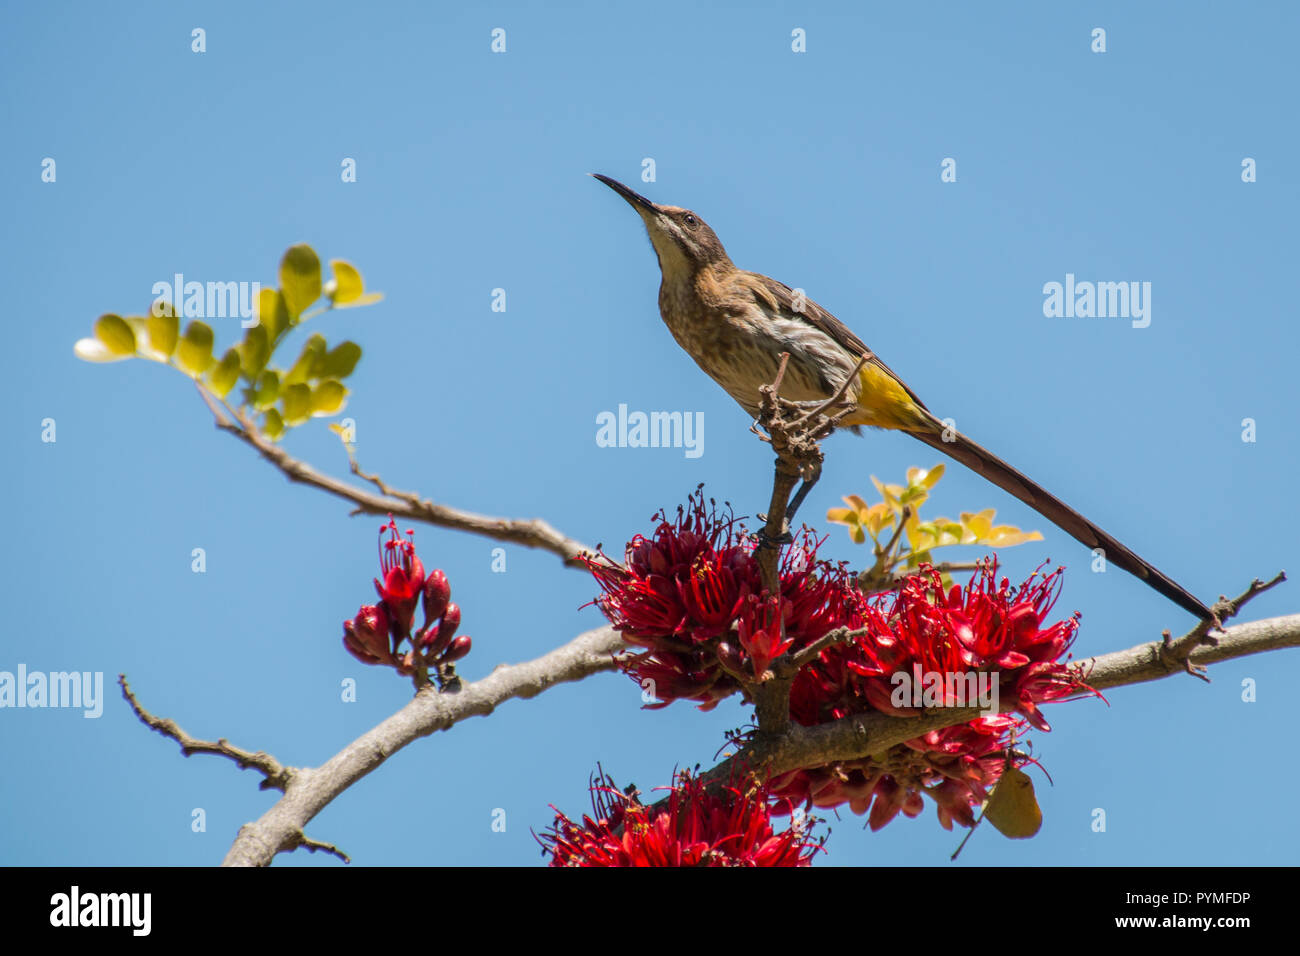 Cape Sugar bird perched in a Weeping Boer-bean tree (Schotia brachypetala) with red flowers and a blue sky background. Stock Photo